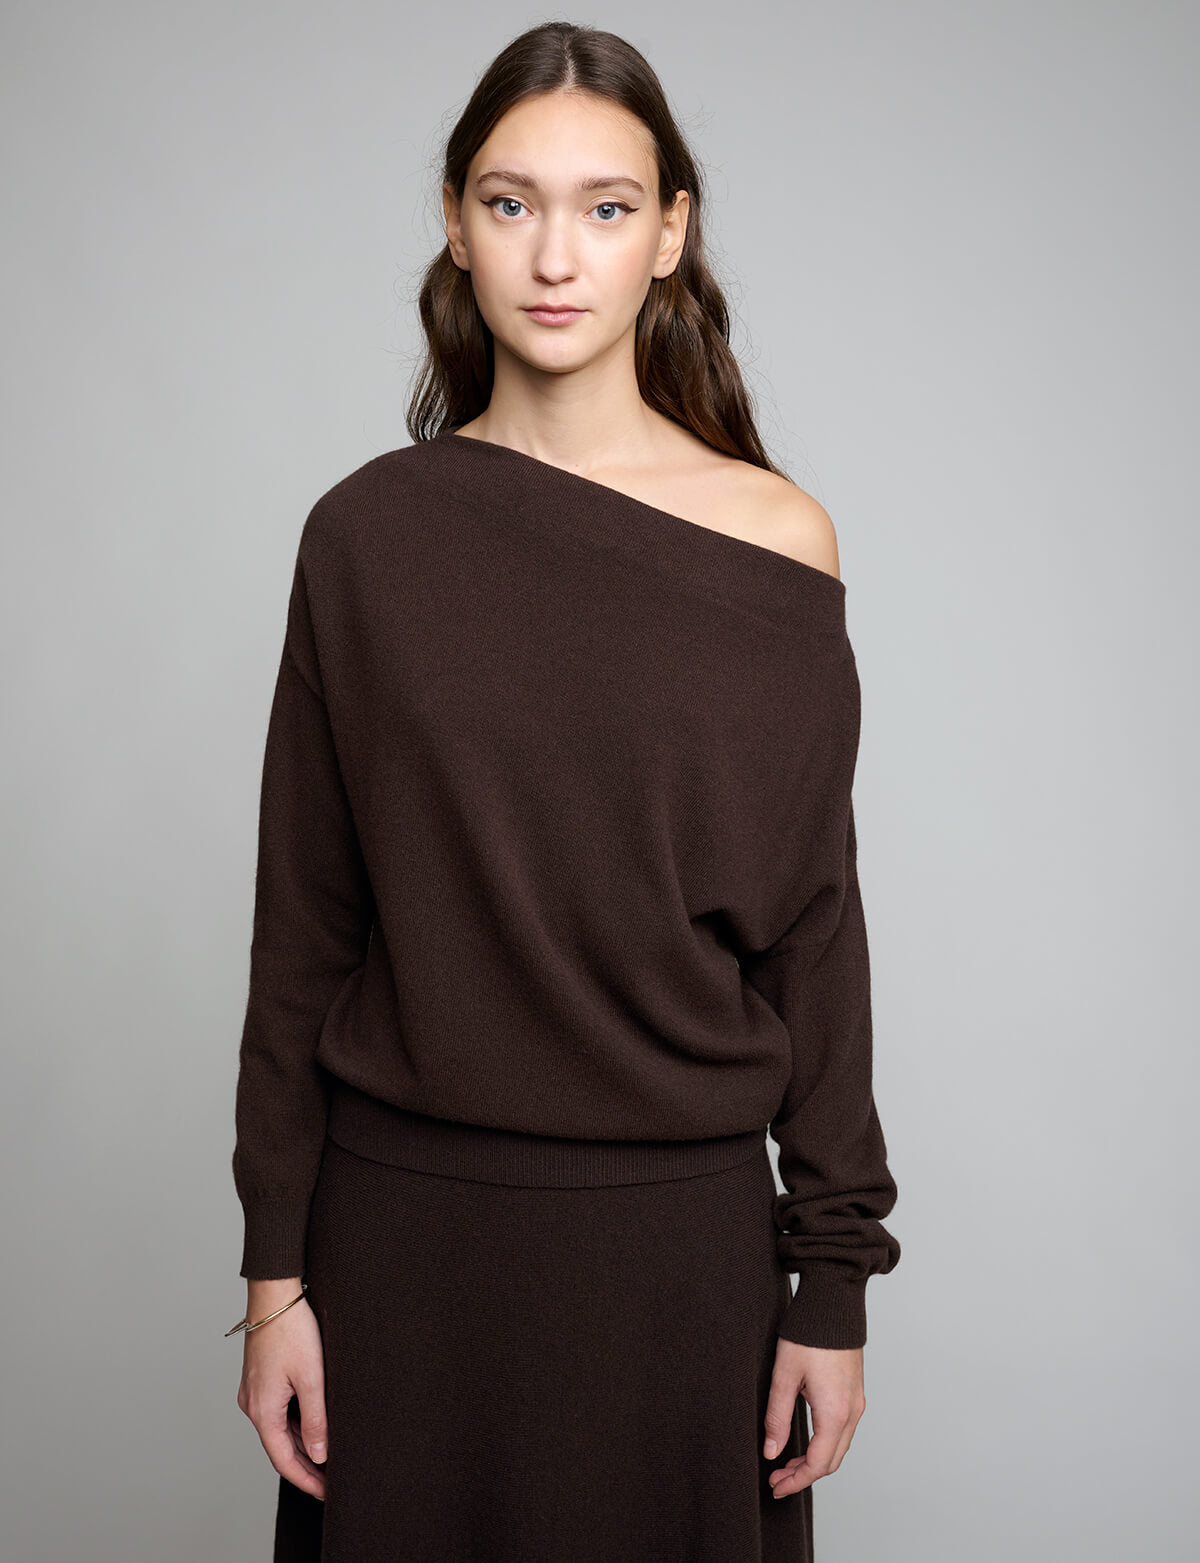 Chocolate One Shoulder Knit Top